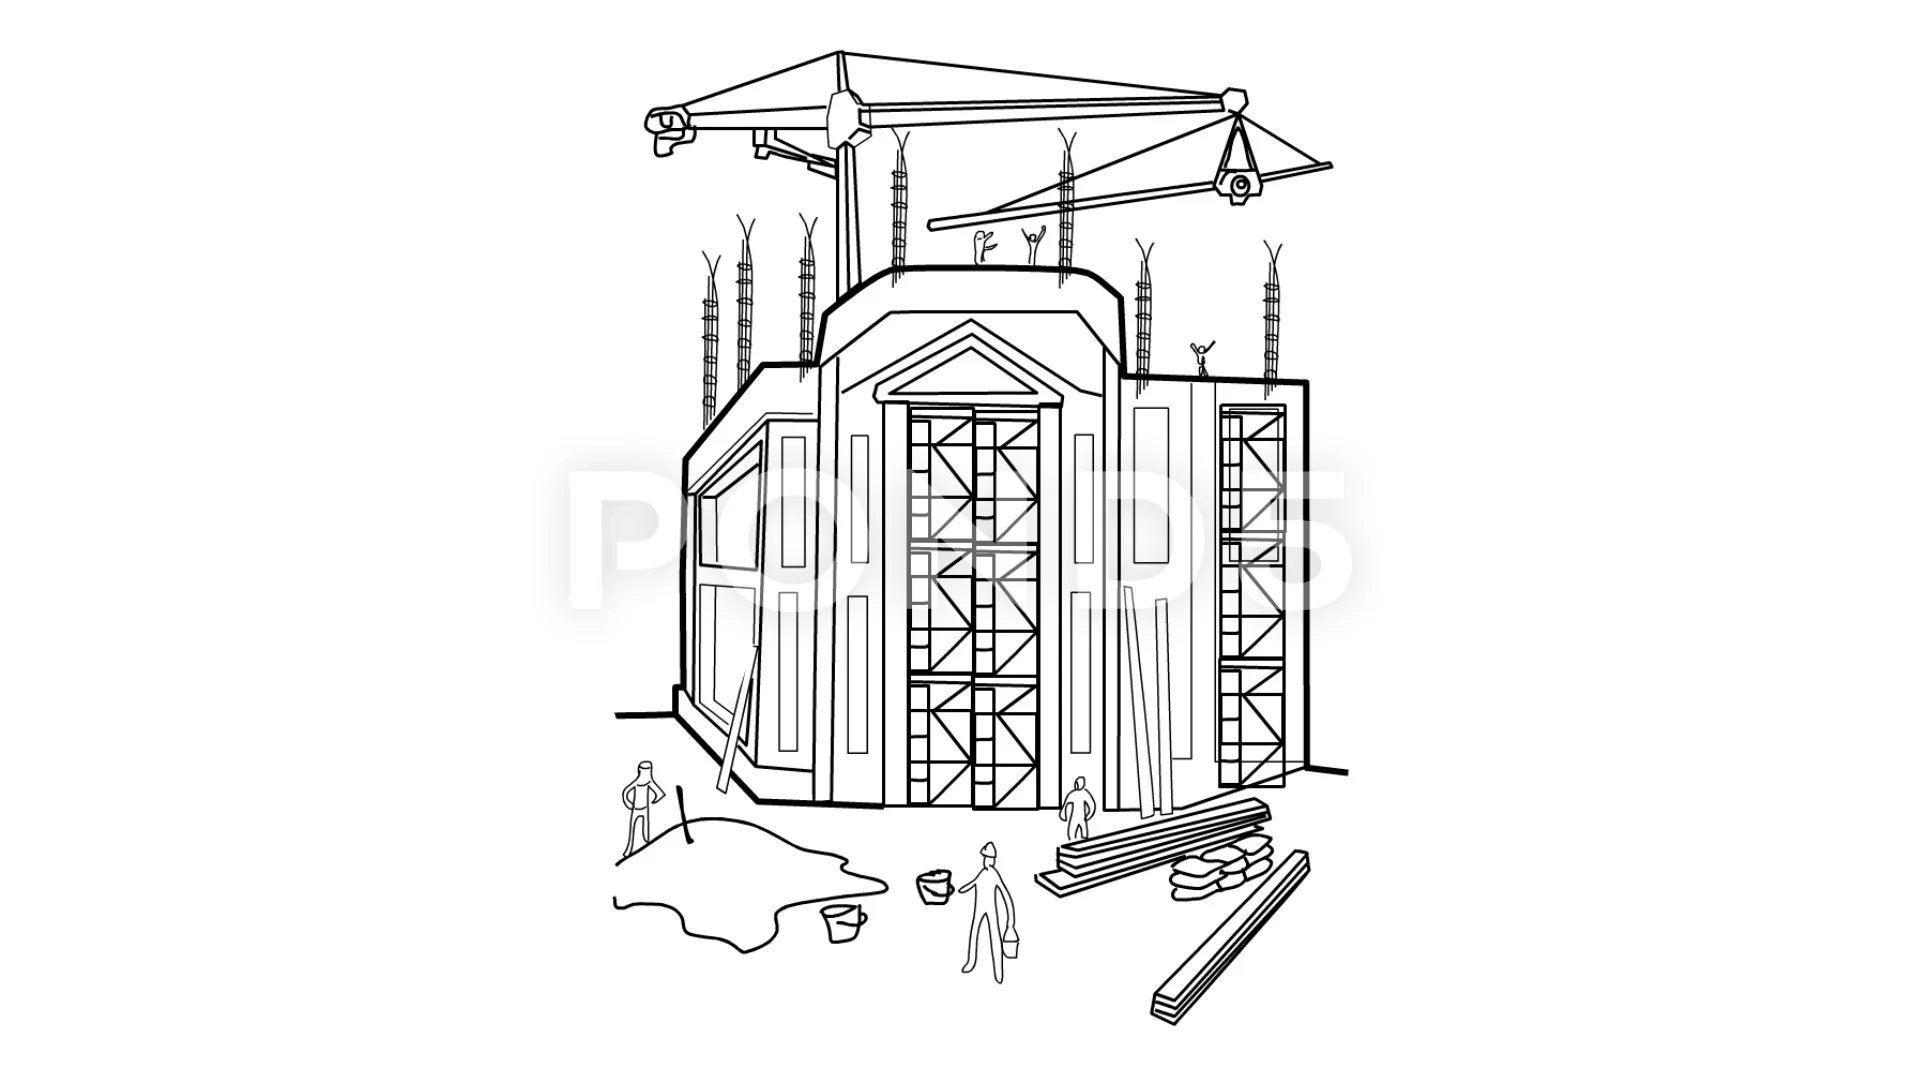 7427128 Building Construction Images Stock Photos  Vectors   Shutterstock  Architecture sketch Architecture drawing Building drawing